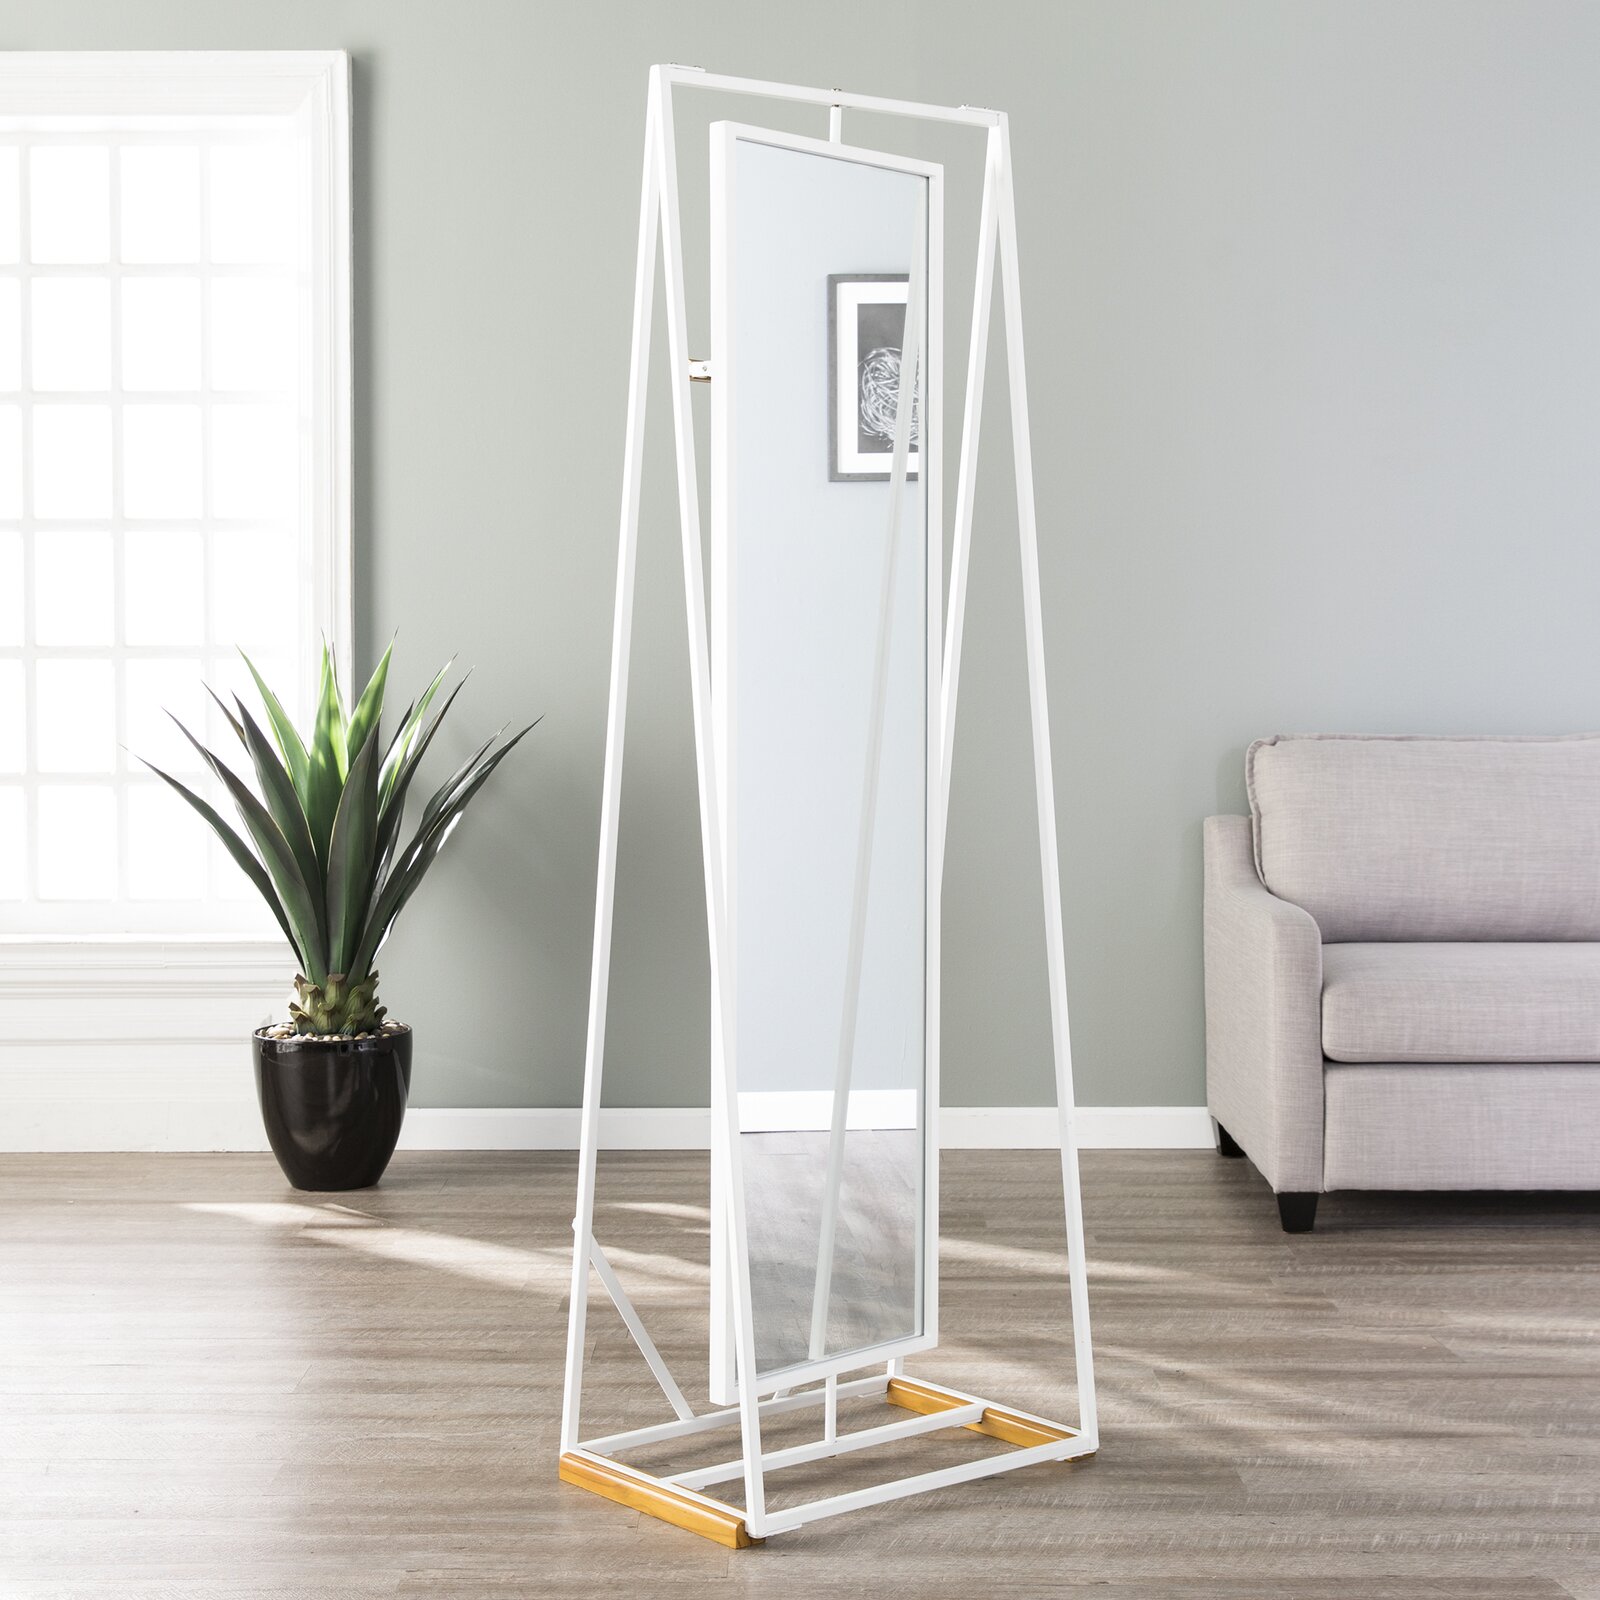 51 Full Length Mirrors To Flatter Your, How To Place A Floor Mirror